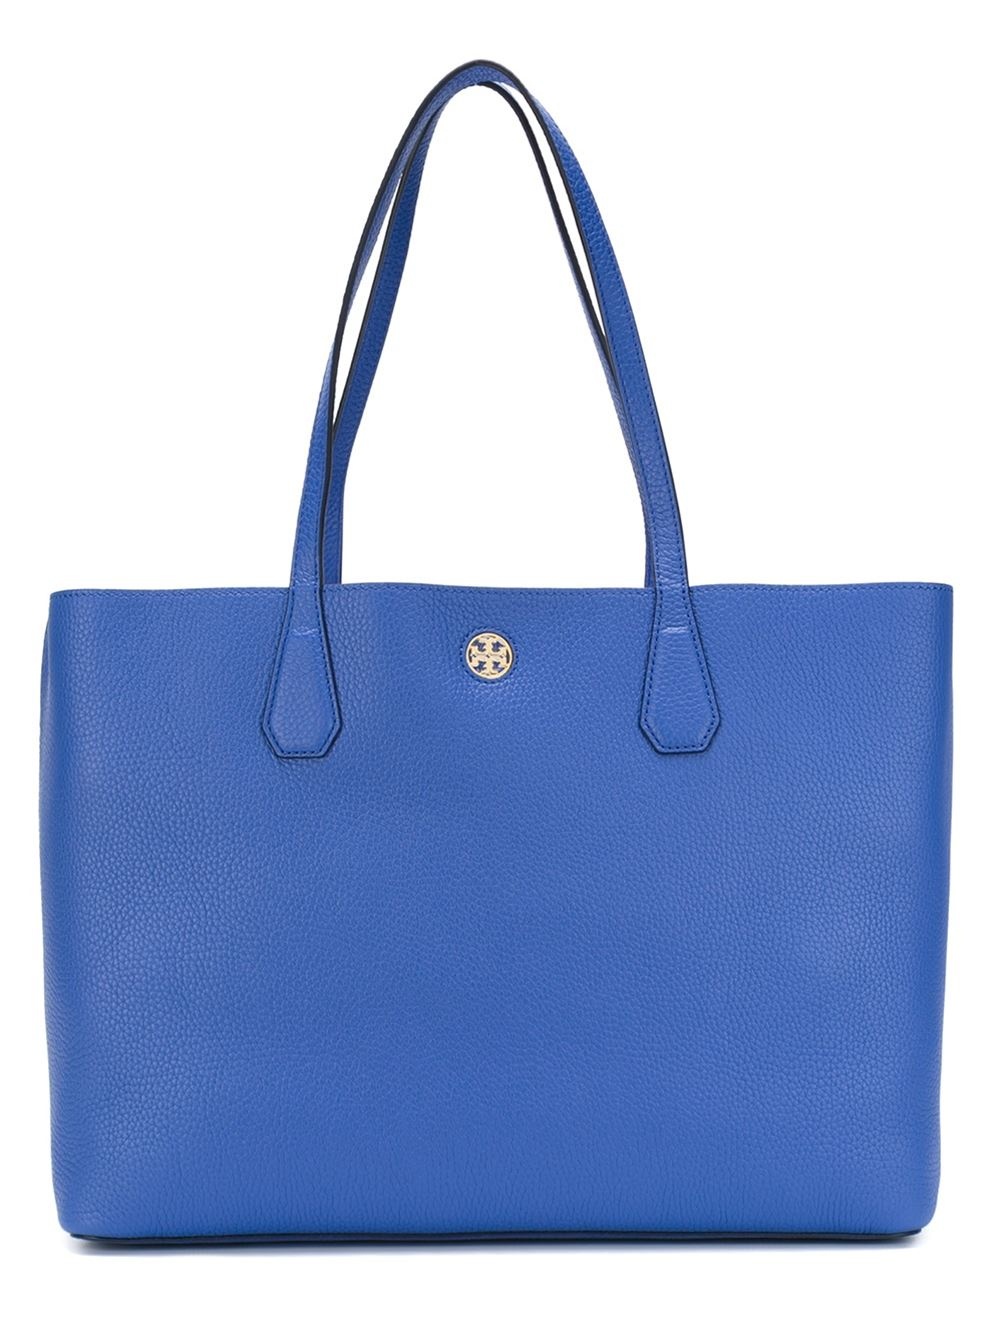 Tory burch 'perry' Tote Bag in Blue | Lyst